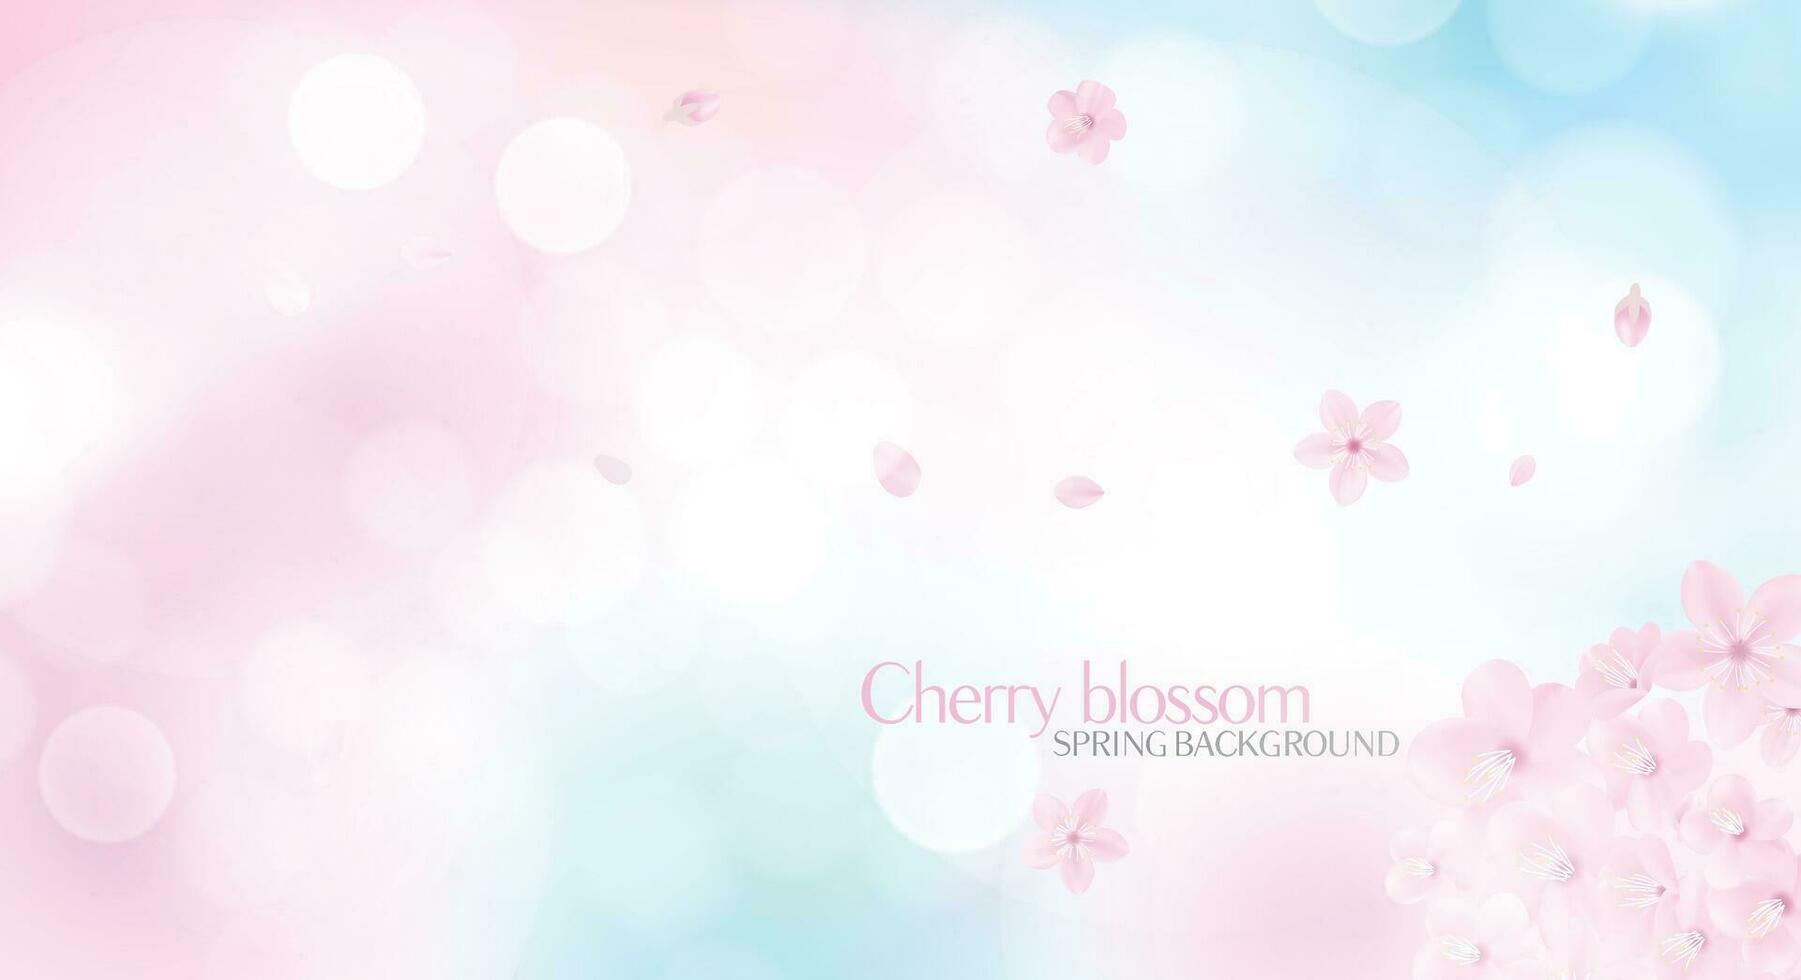 Spring background with floral flowers design. vector